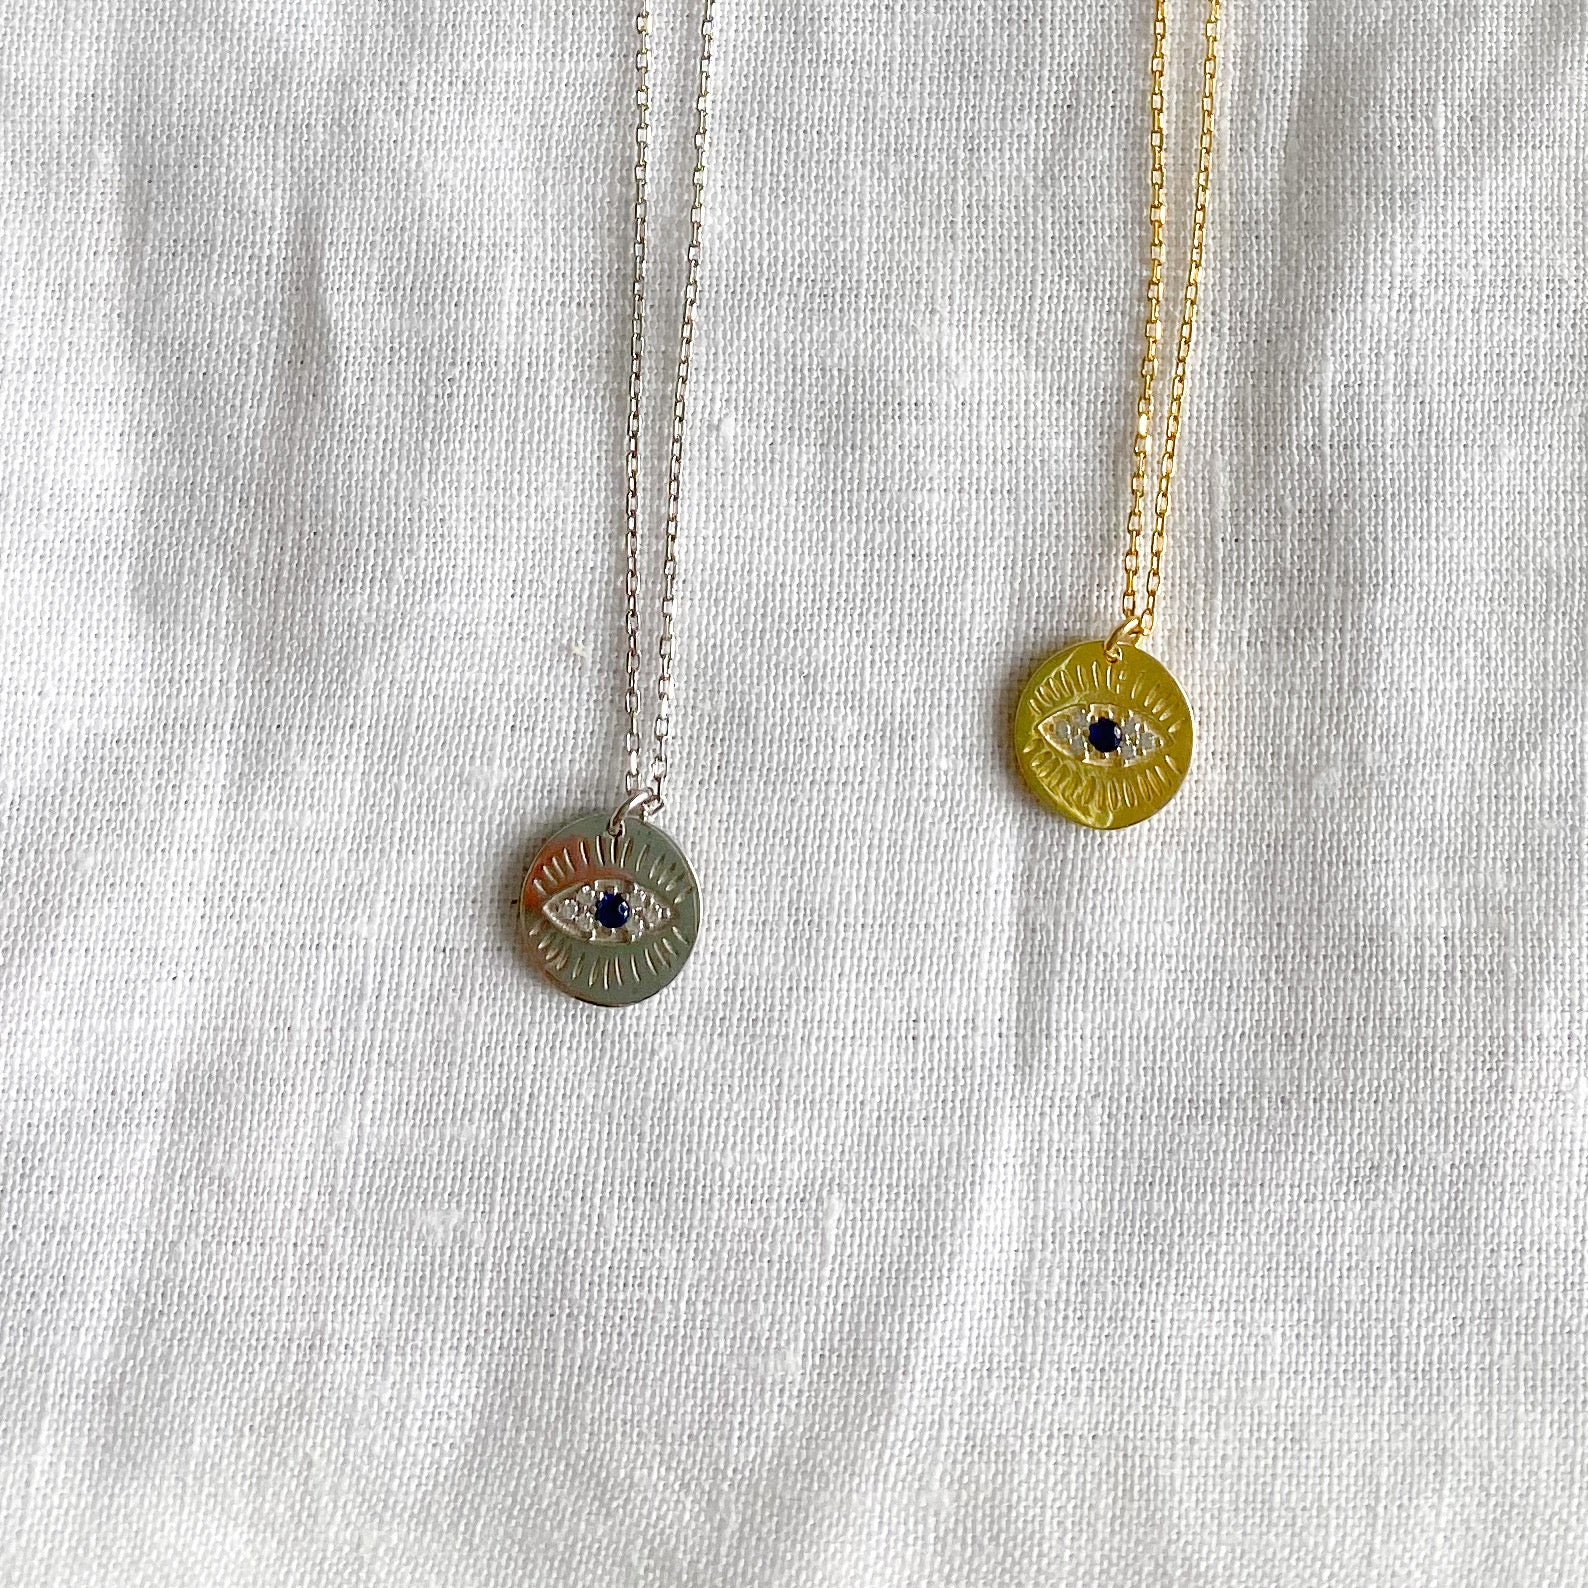 Round Evil Eye Protection Charm Necklace - BelleStyle